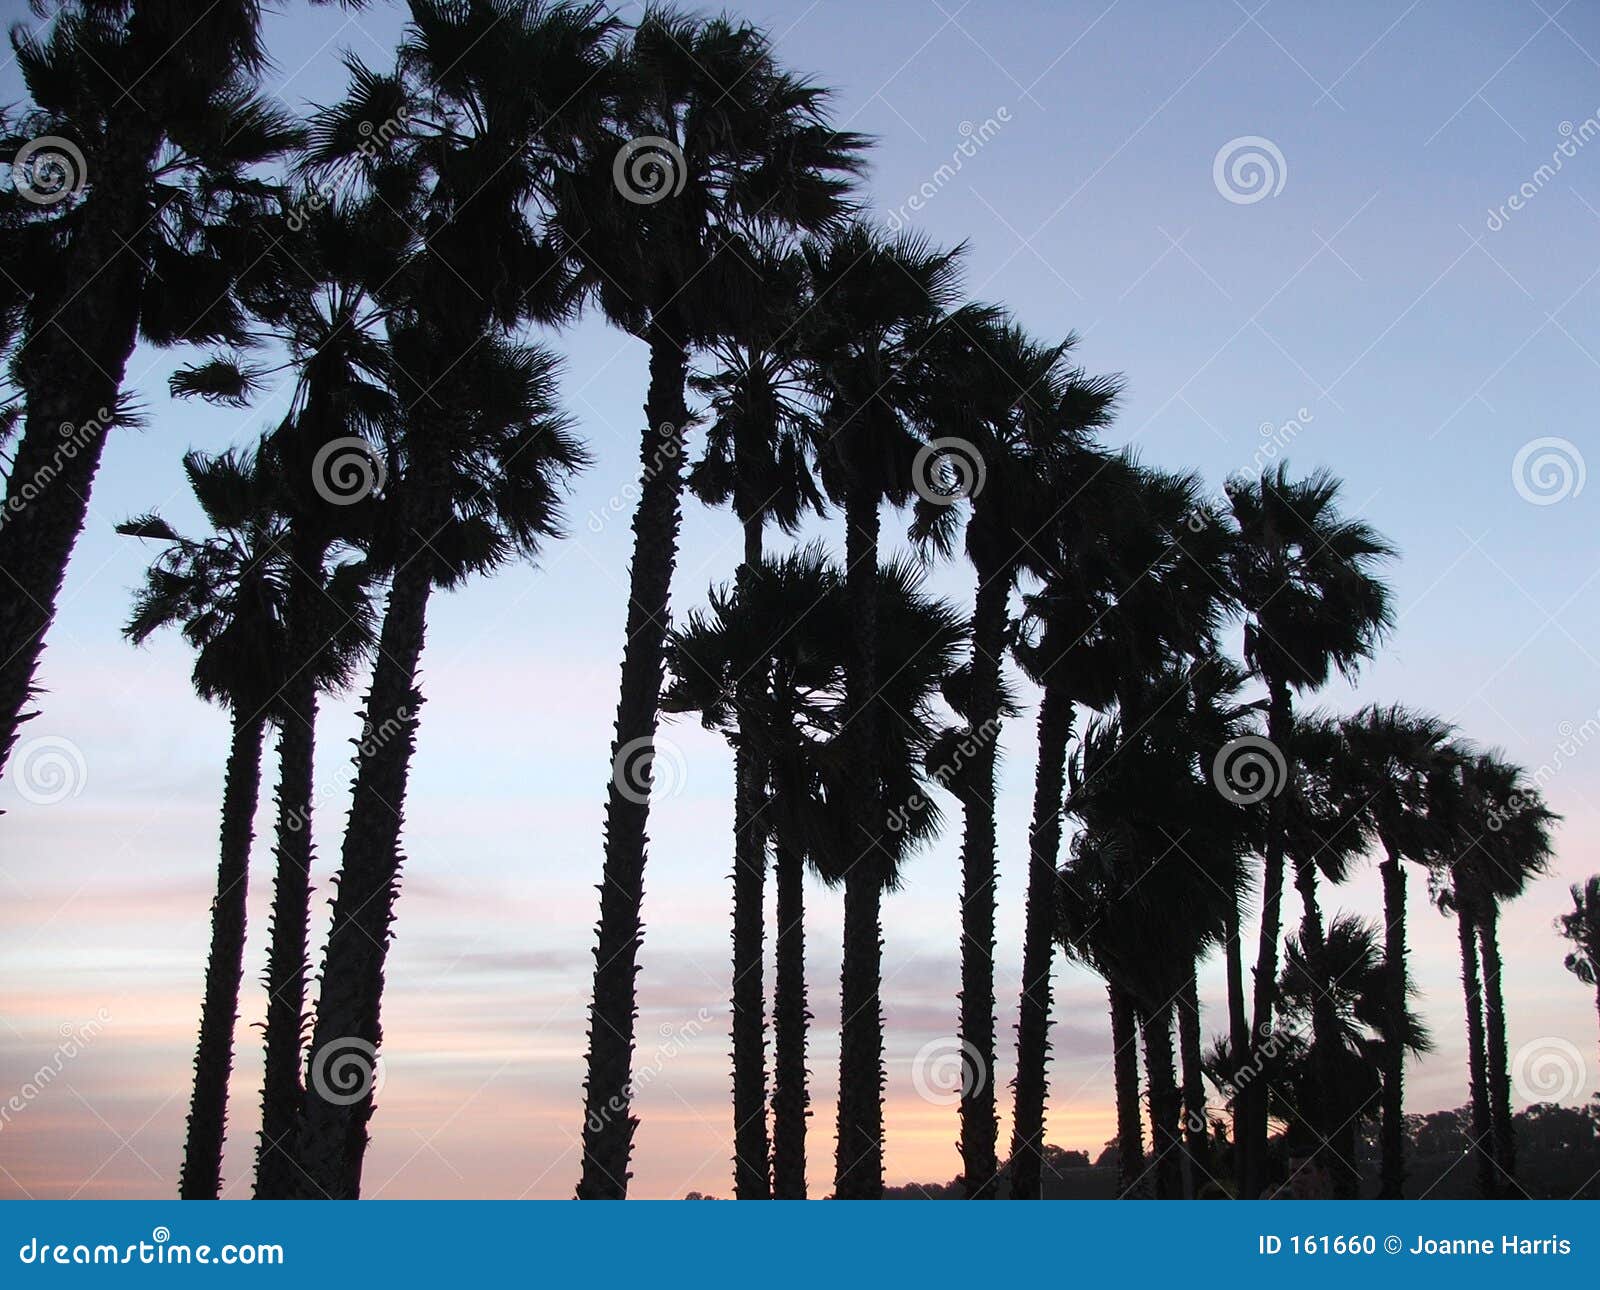 Palm trees at sunset stock photo. Image of tree, blue, silhouetted - 161660